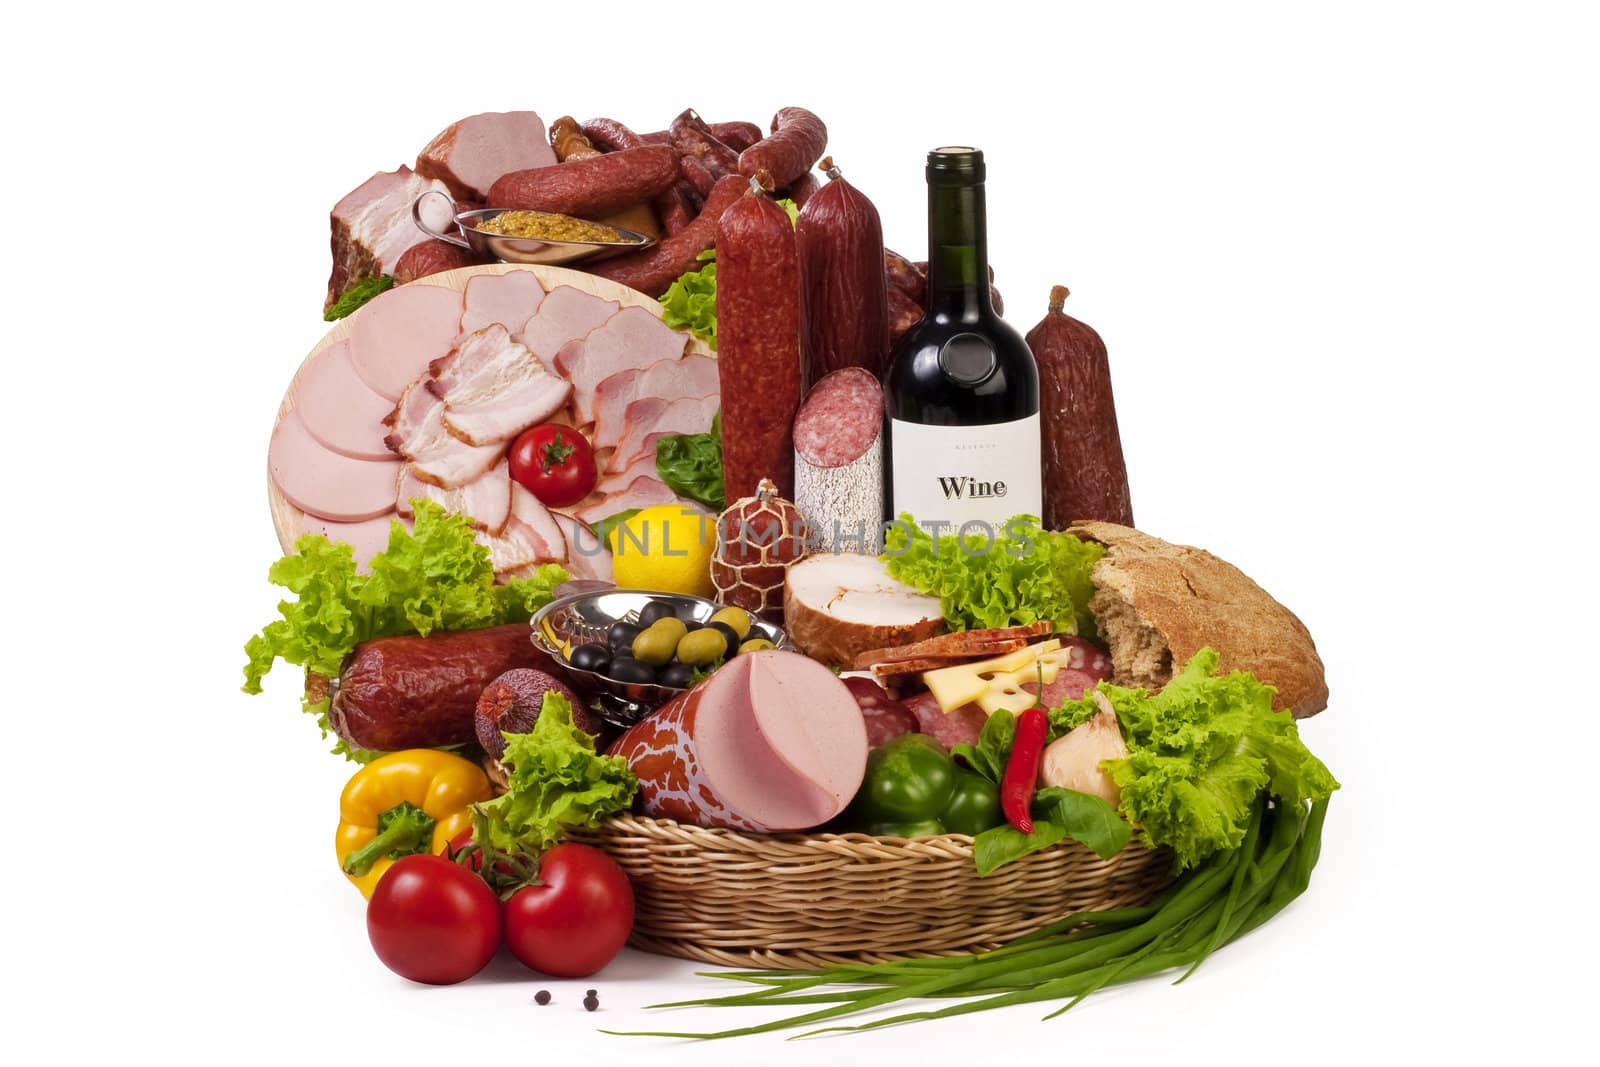 A composition of meat and vegetables with wine by igor_stramyk